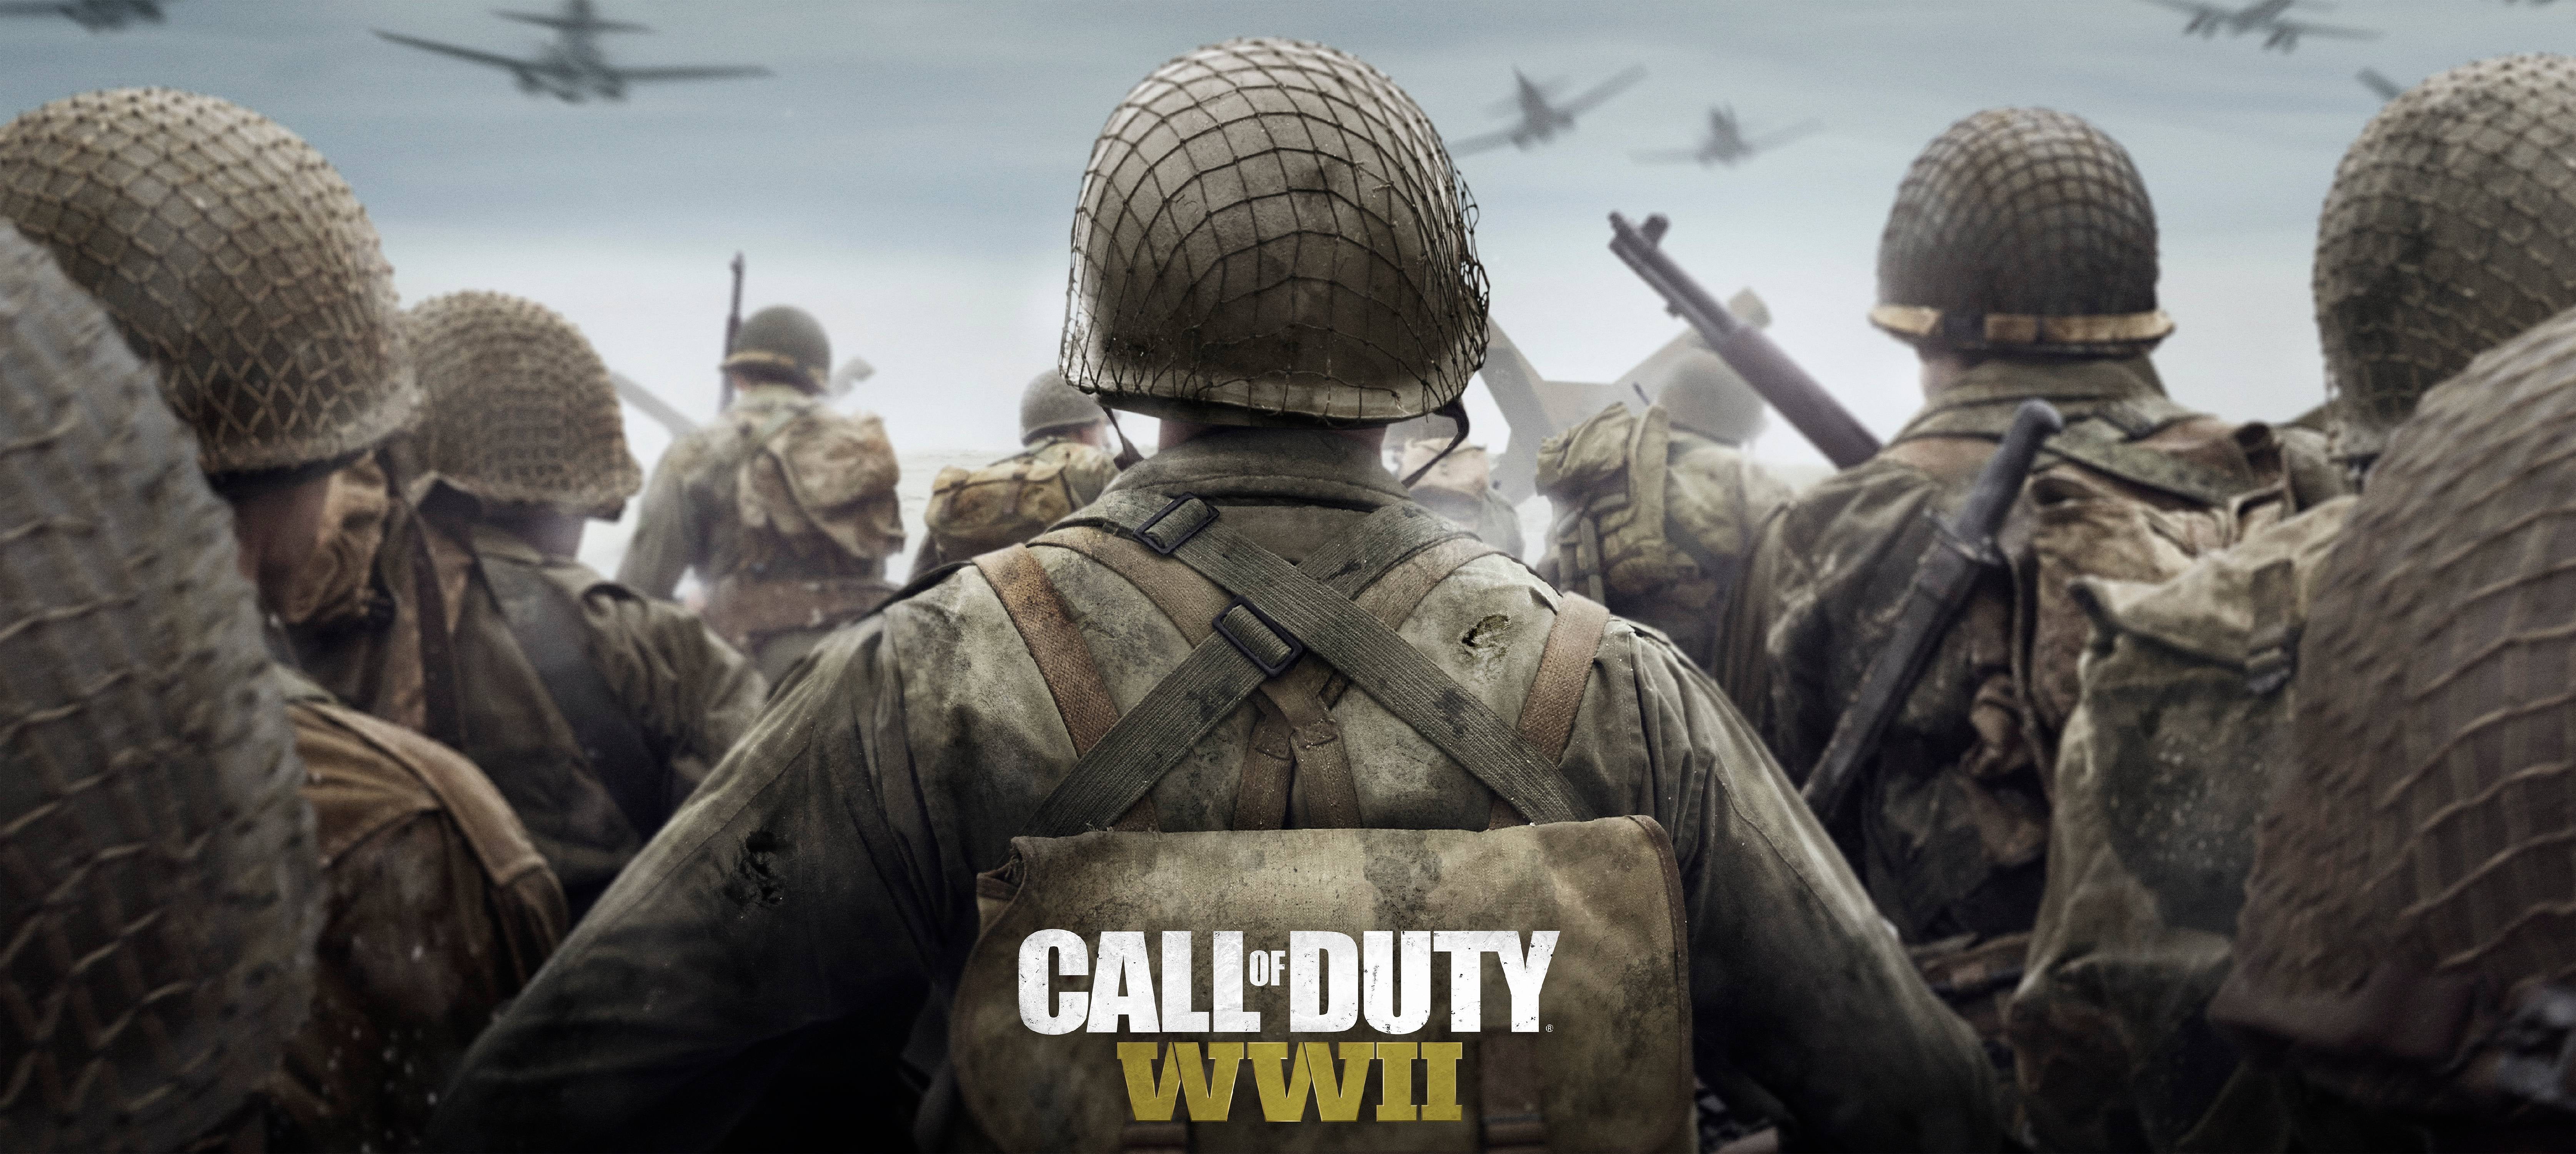 Call of Duty: WWII [Xbox One] — MyShopville